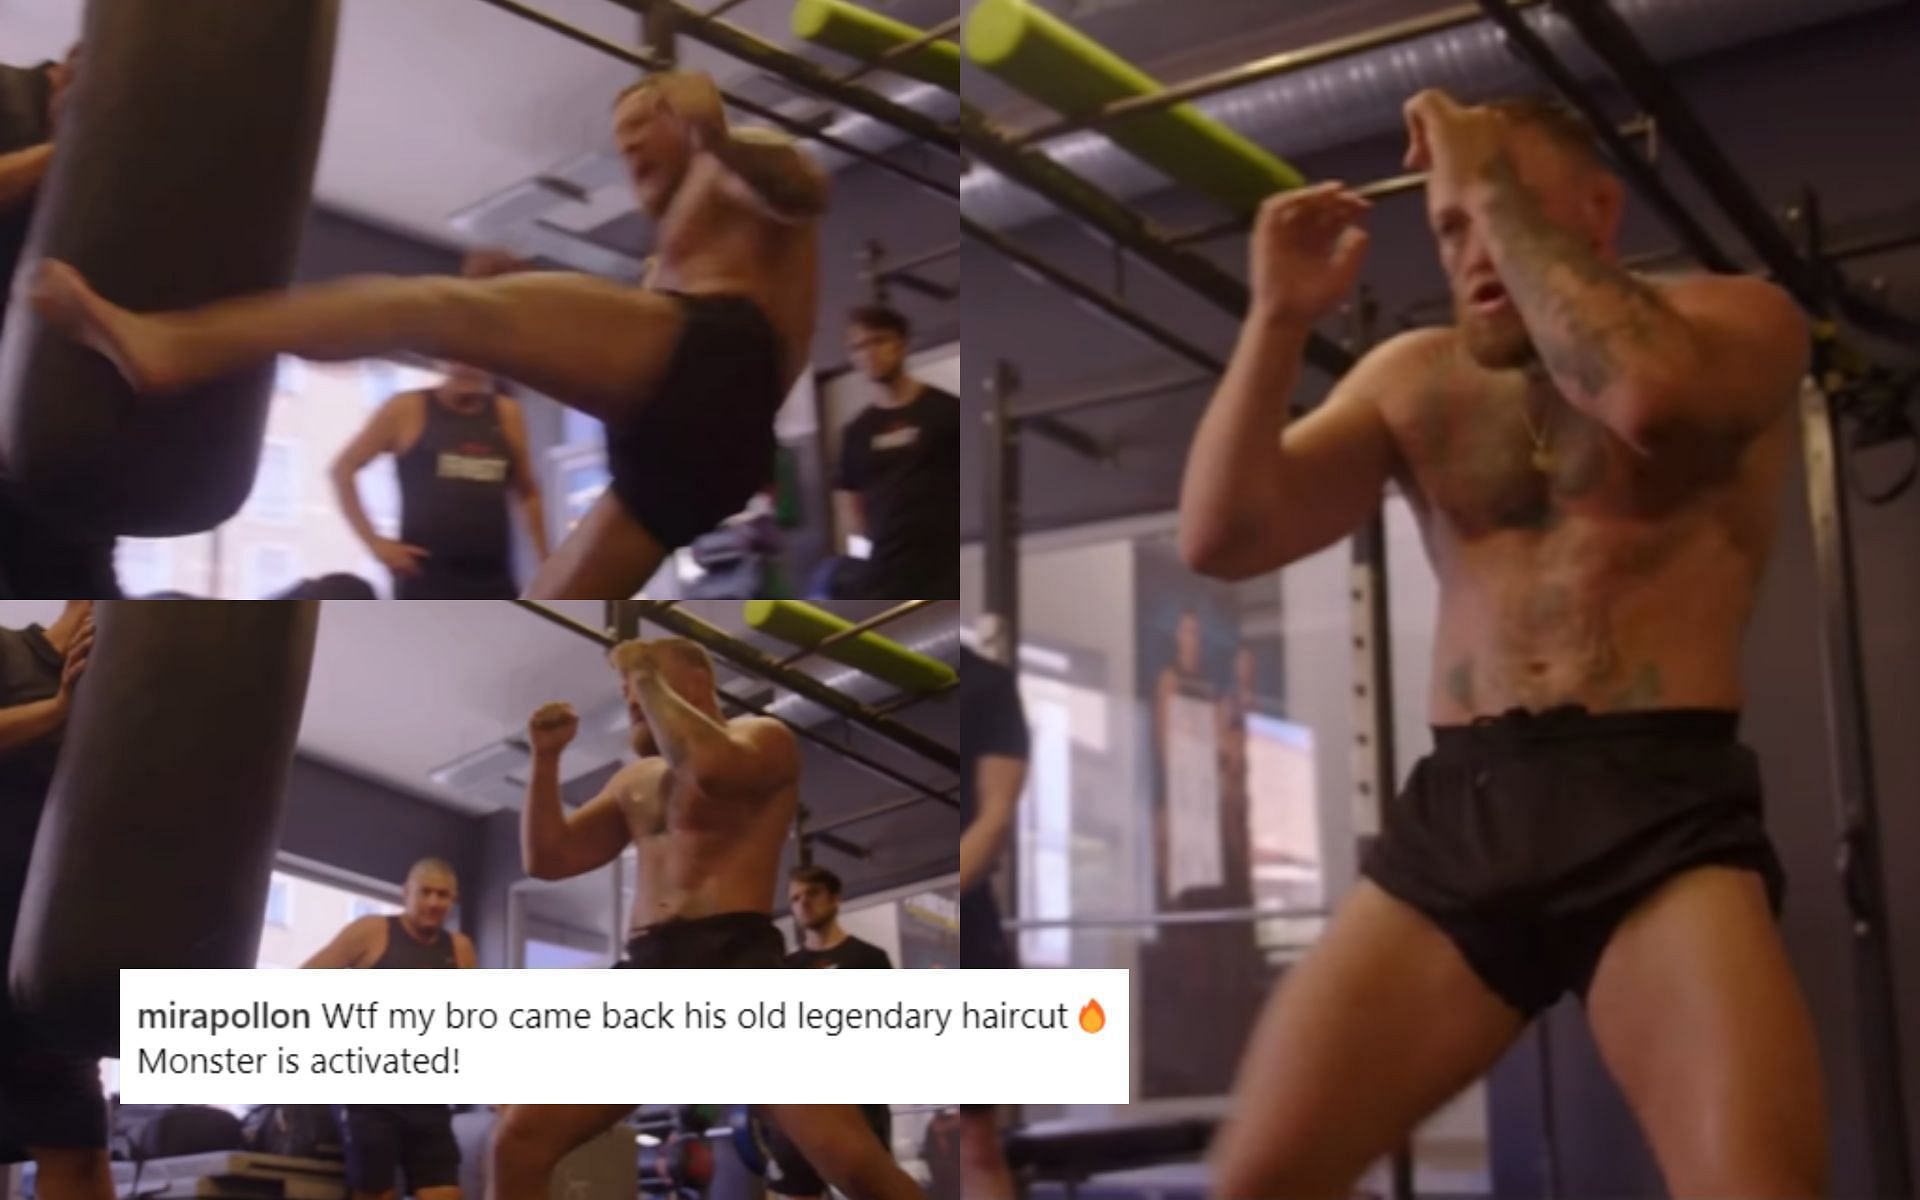 Conor McGregor (in frame) delivering powerful kicks on bag has fans excited [Image courtesy of @thenotoriousmma on Instagram]